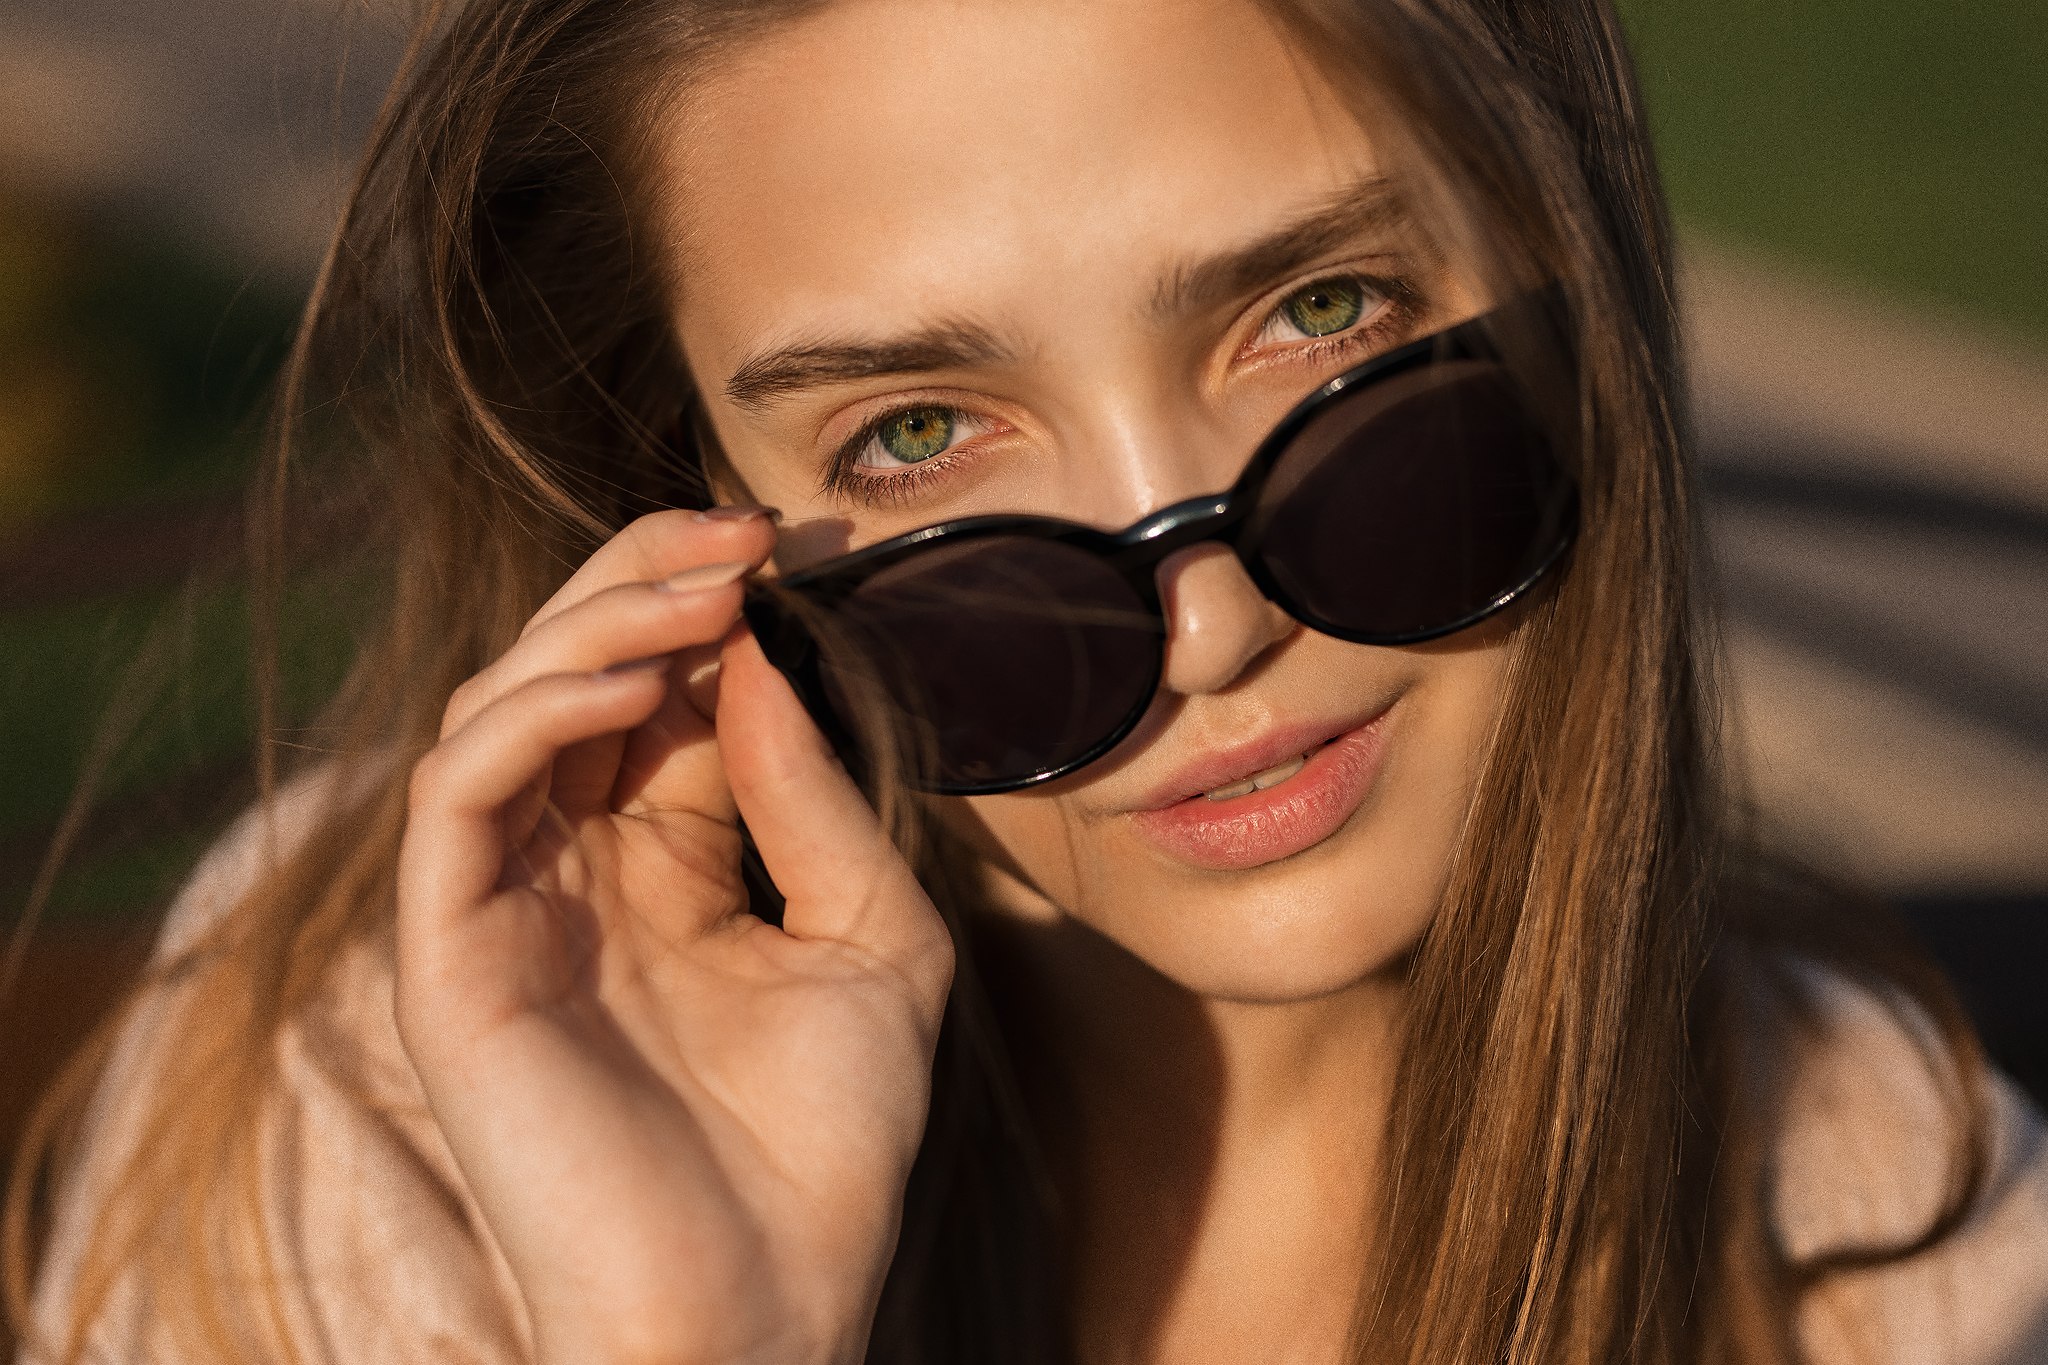 People 2048x1365 women with shades Dmitry Shulgin women model 500px Tina (model) face